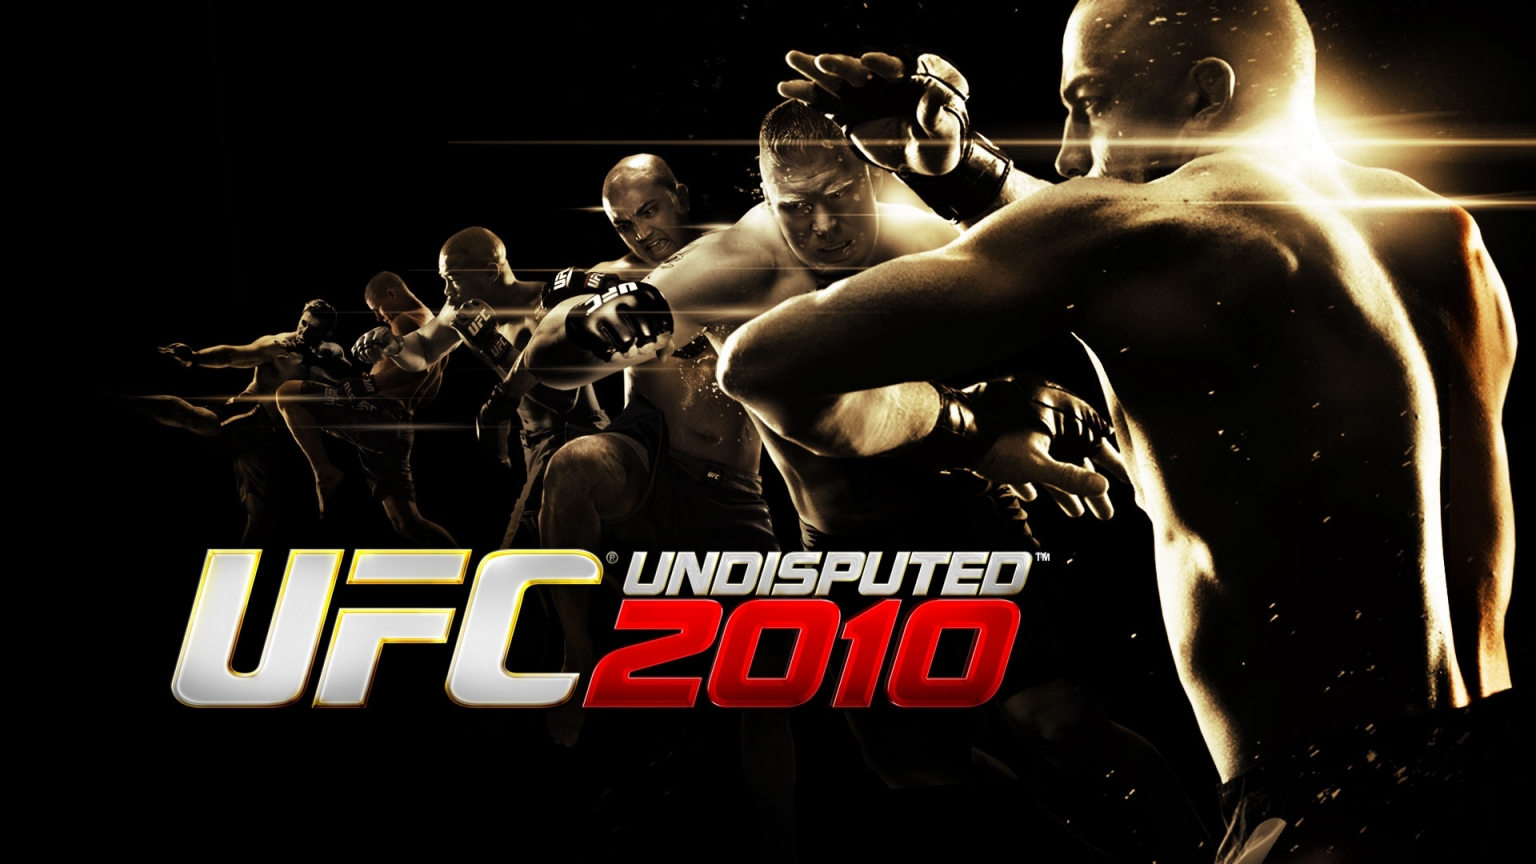 UFC Undisputed 2010 for 1536 x 864 HDTV resolution